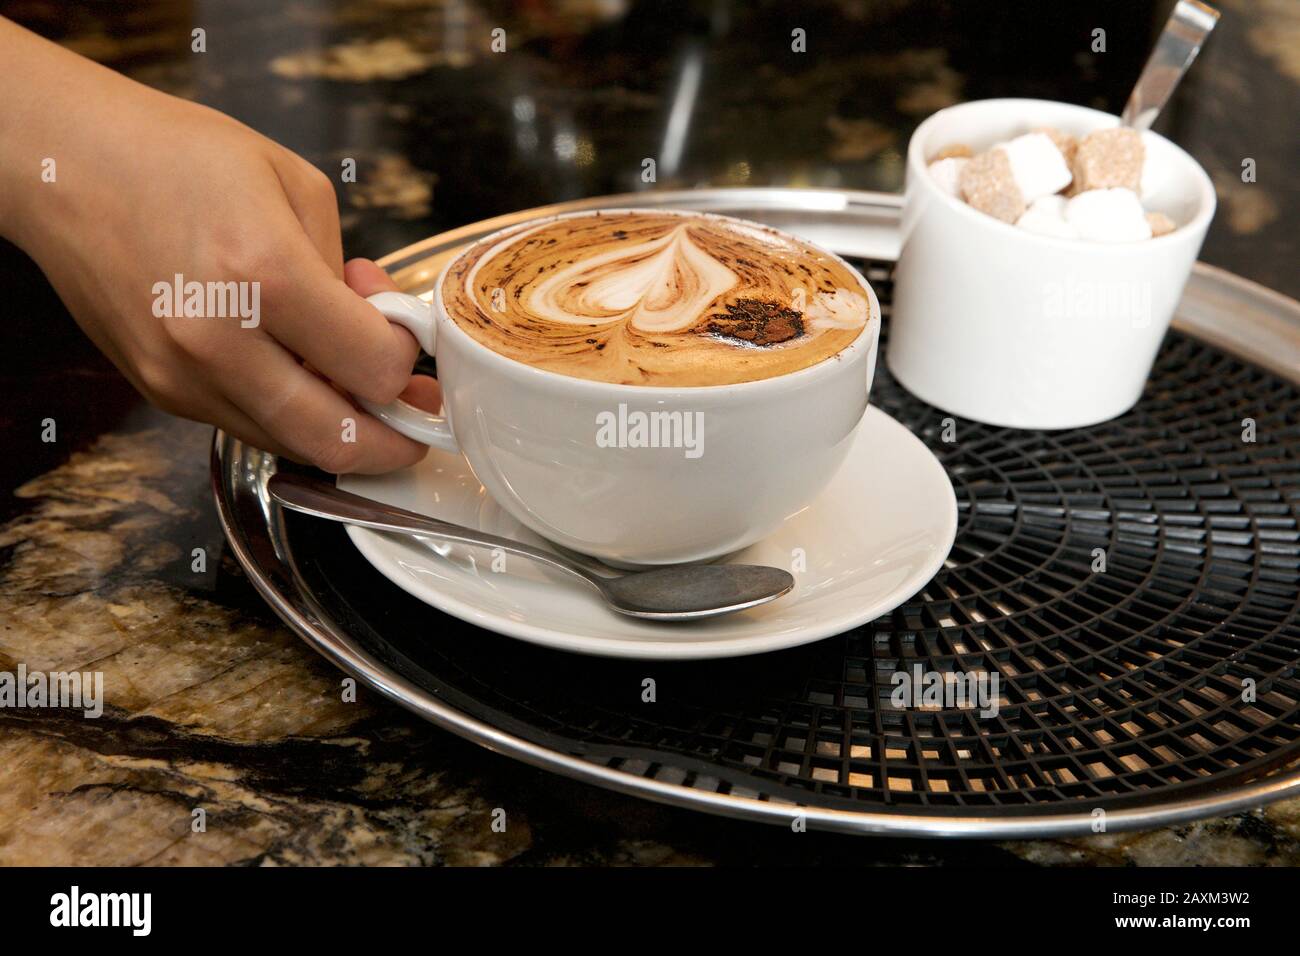 A woman's hand about to lift a cup of cappuccino coffee. Stock Photo